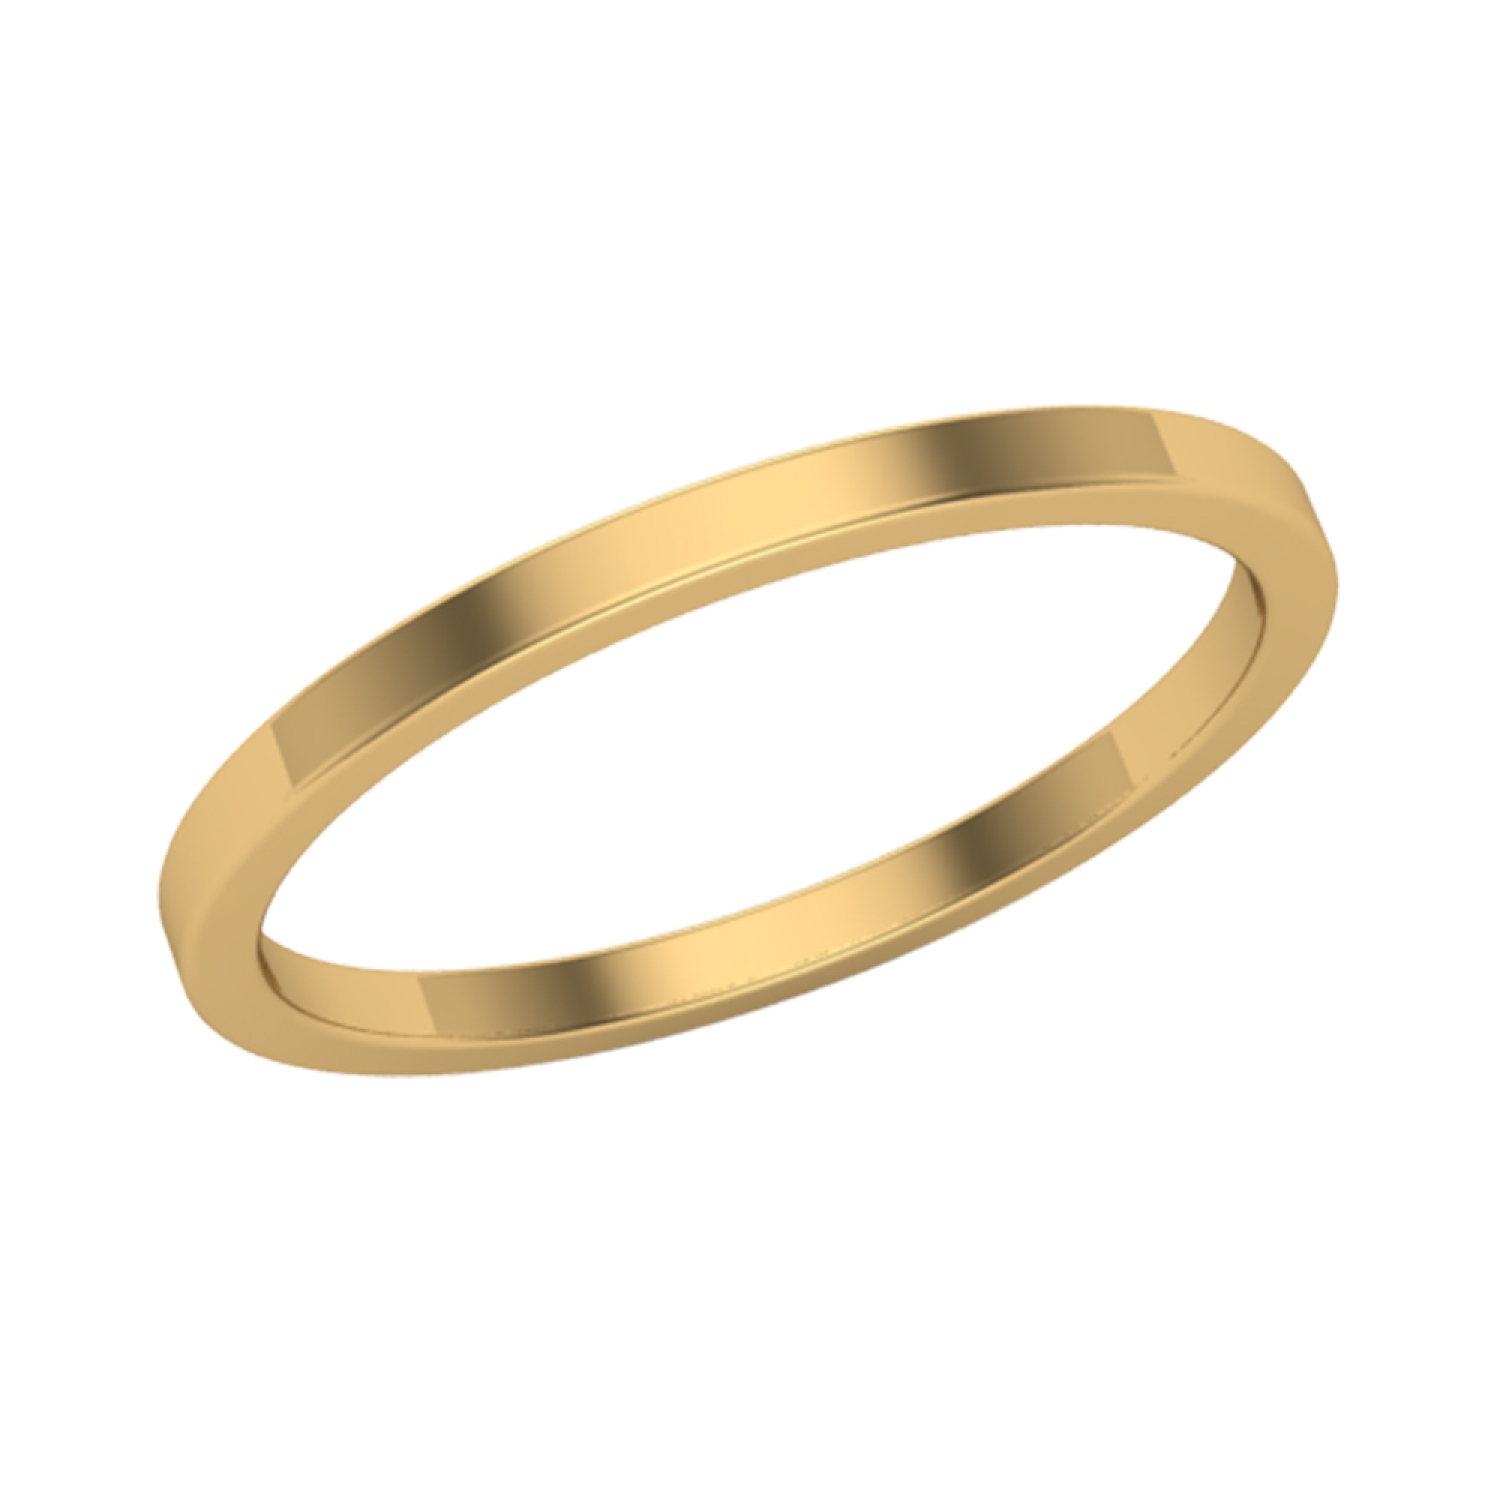 Buy Senco Gold Aura Collection 22k Yellow Gold Ring Online at Low Prices in  India | Amazon Jewellery S… | Gold ring designs, Gold rings online, Gold  jewelry fashion